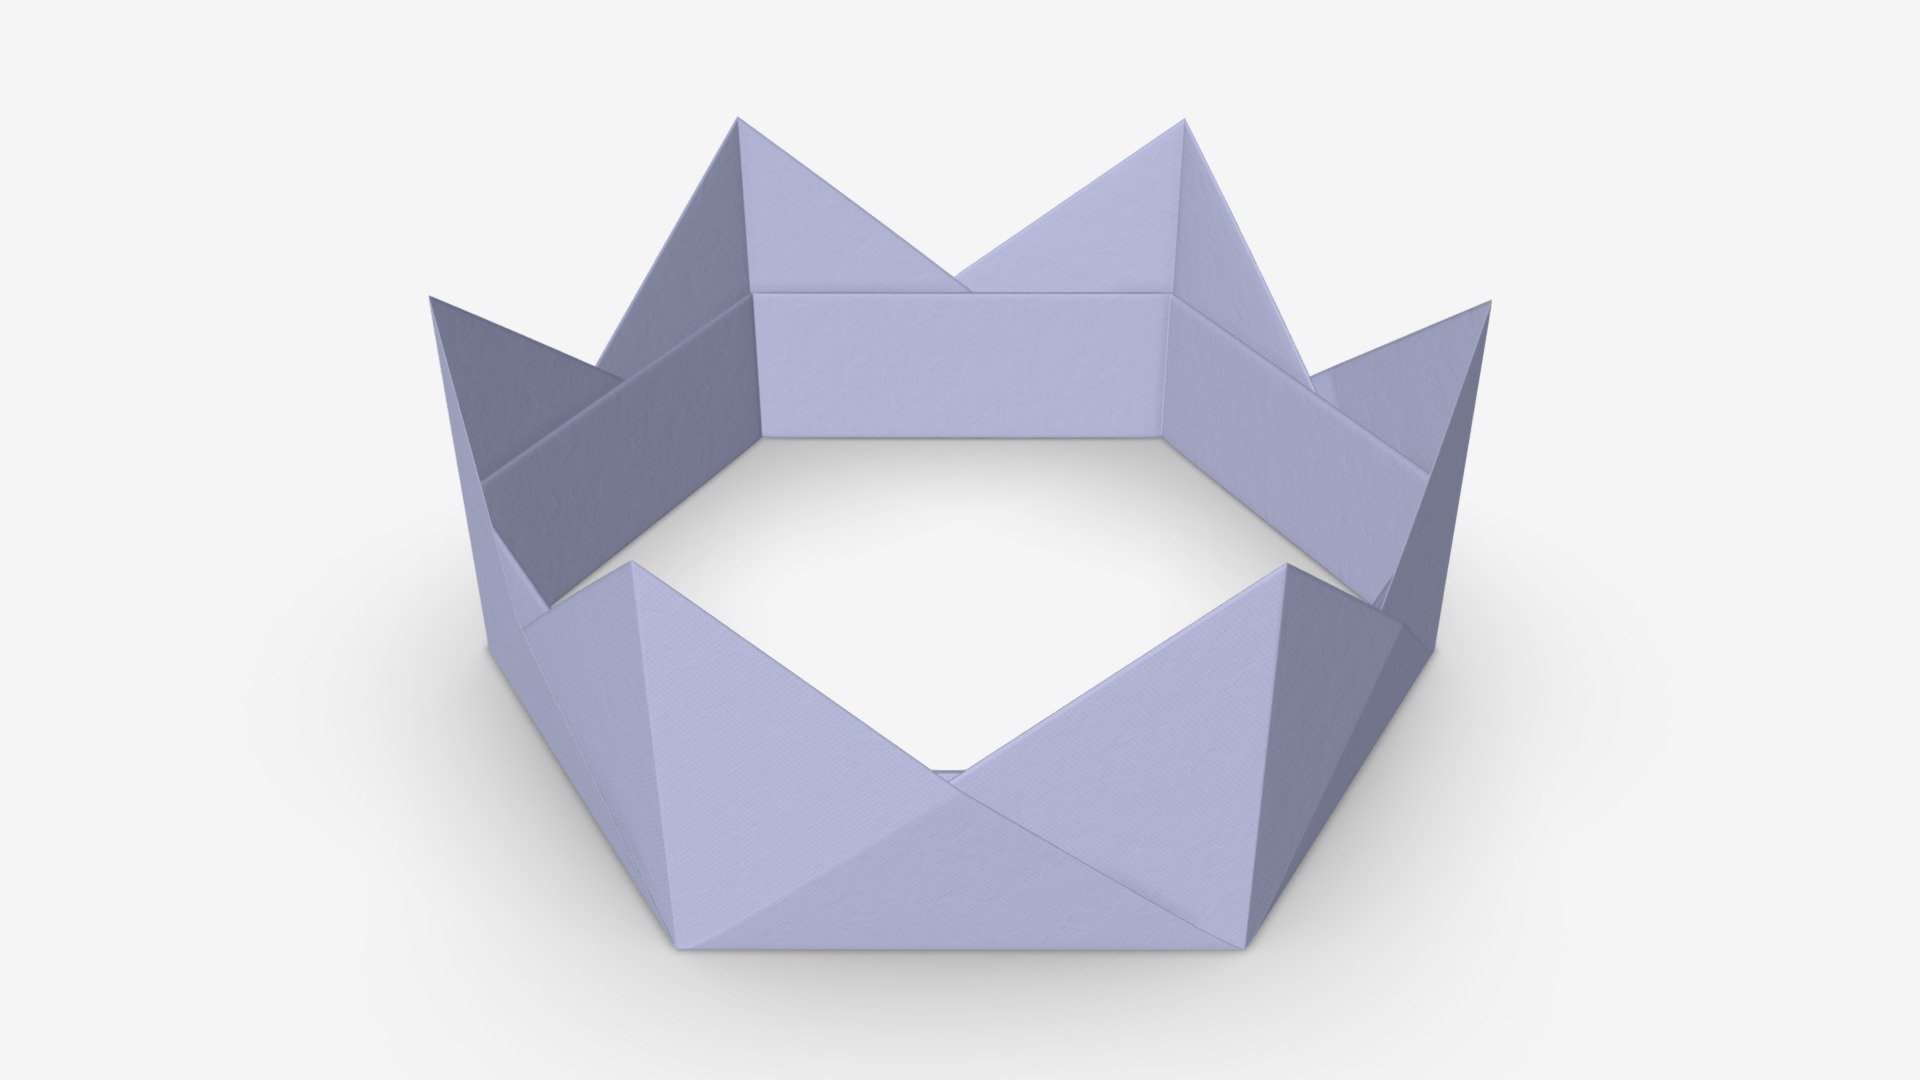 Paper crown origami - Buy Royalty Free 3D model by HQ3DMOD (@AivisAstics)  [f5f50a7]